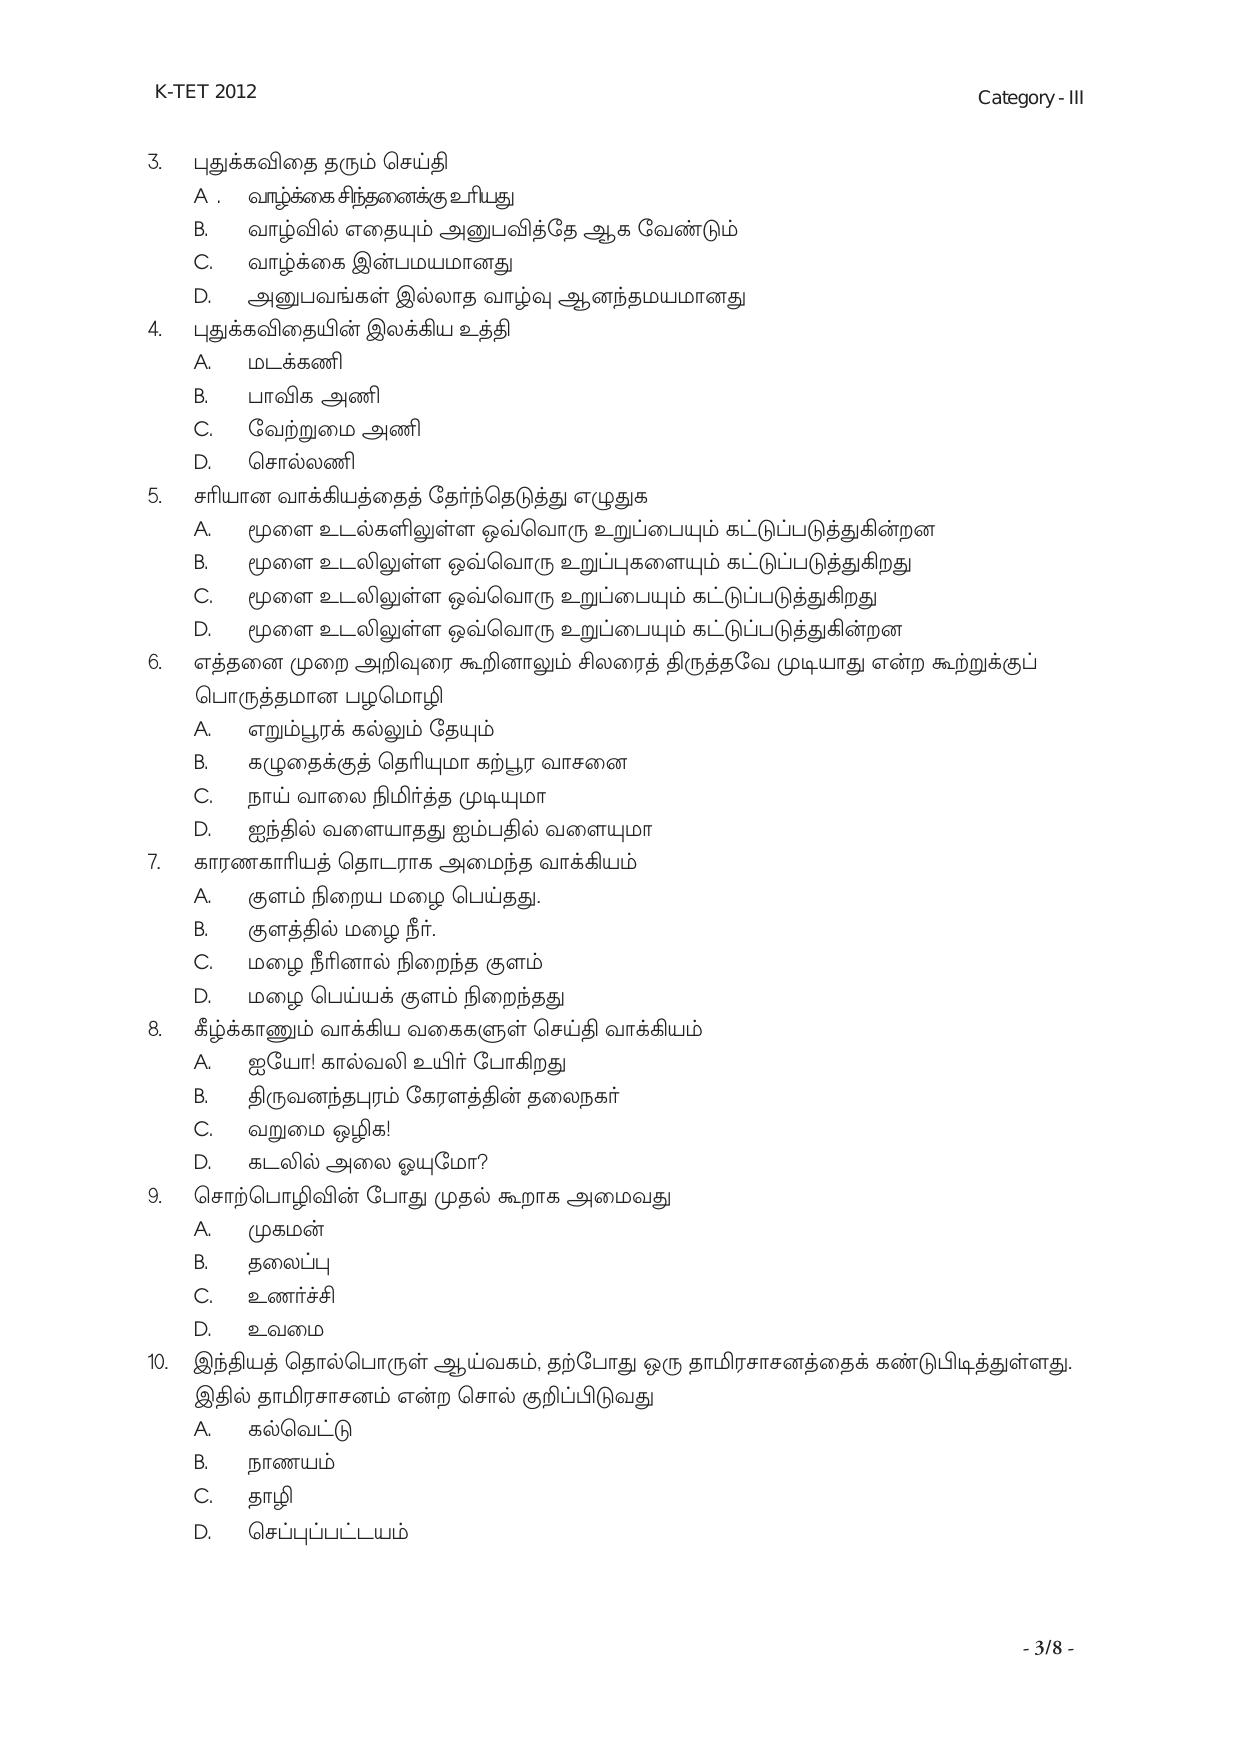 KTET Category III High School Teacher (8 to 10) Exam Previous Papers - Page 8